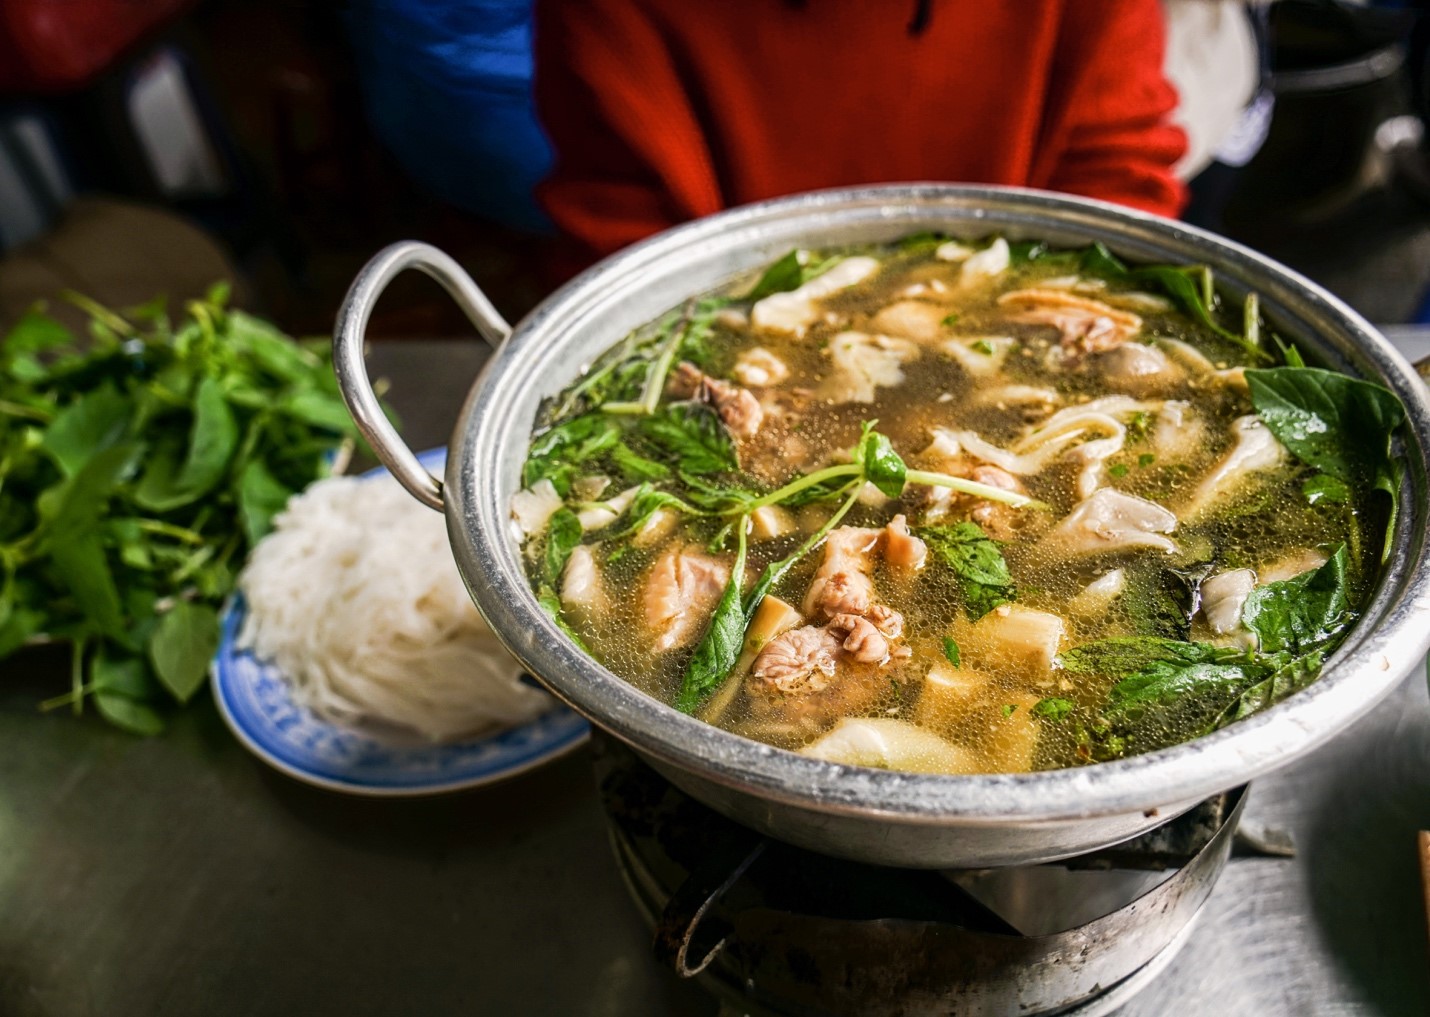 Chicken hotpot with lemon basil leaves. Photo: Nguyen Trung Au / Tuoi Tre News